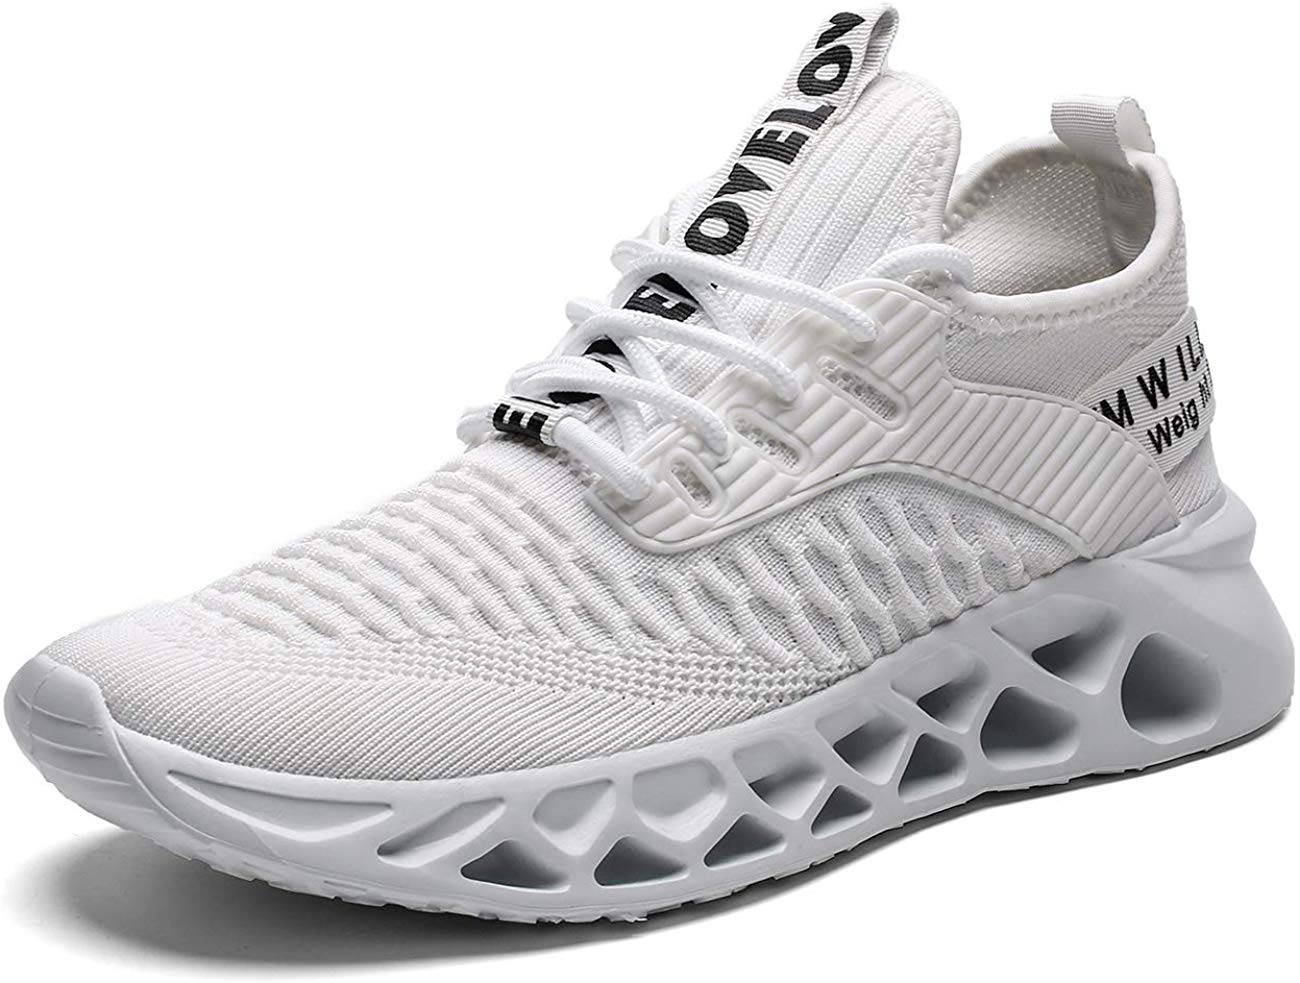 men's breathable sport casual sneakers shoes